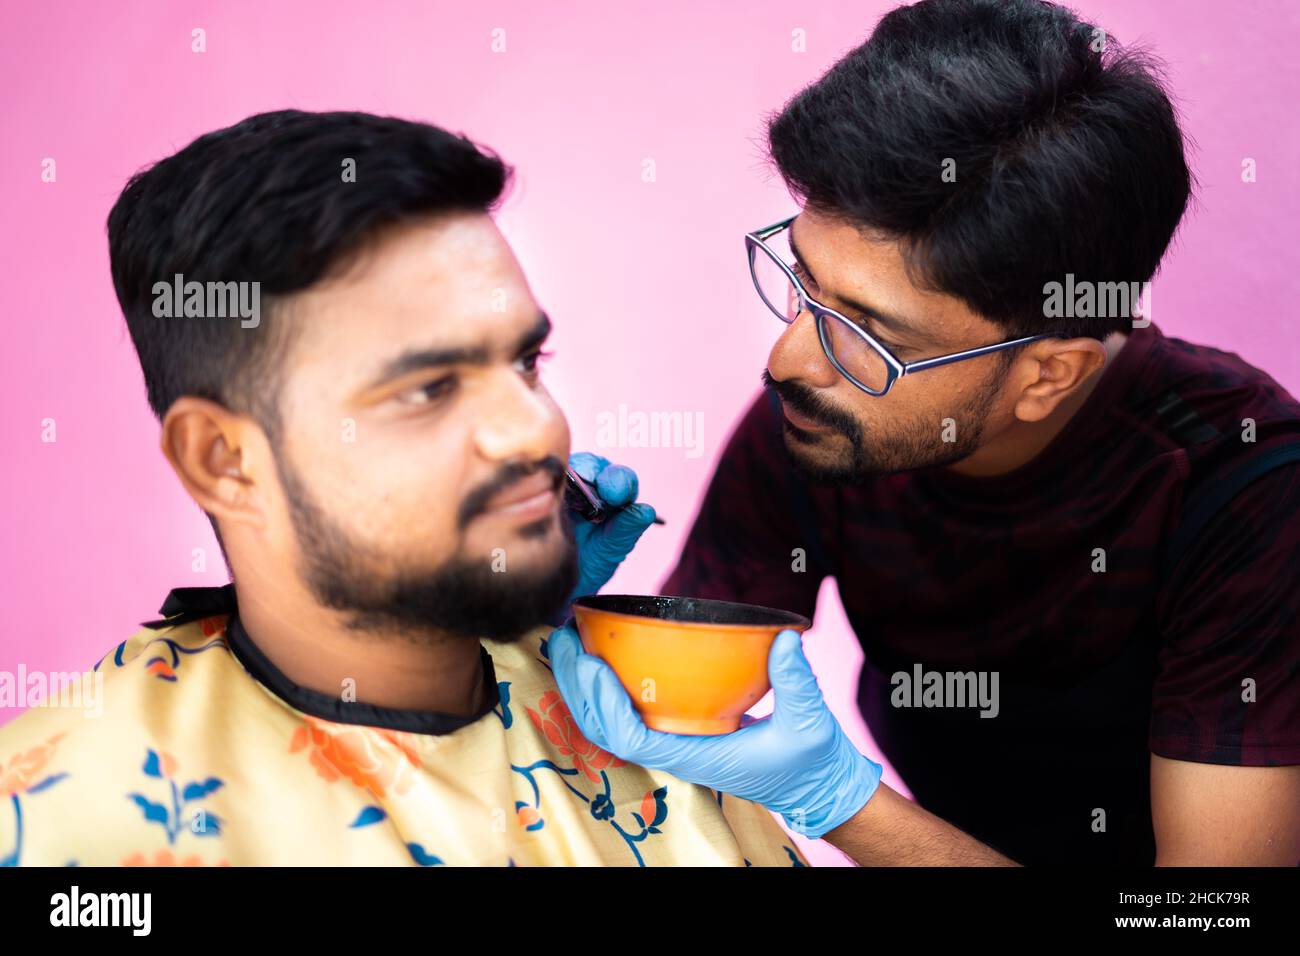 focus on barber, close up shot of concentrated hairdresser applying hair dye or black henna to young man to cover white hair beard at salon - concept Stock Photo